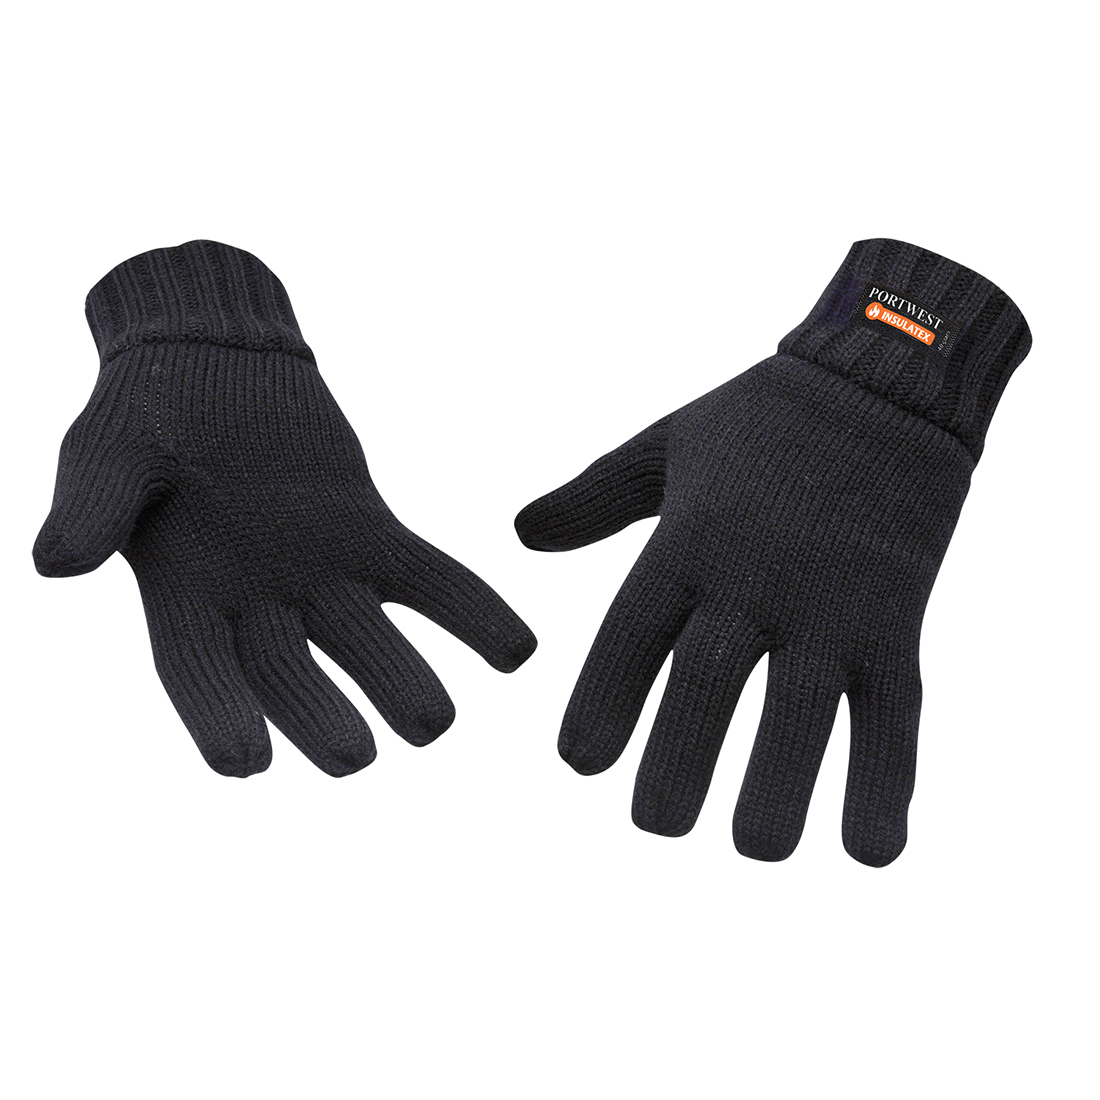 GL13 Portwest® Knitted Insulatex Winter Gloves